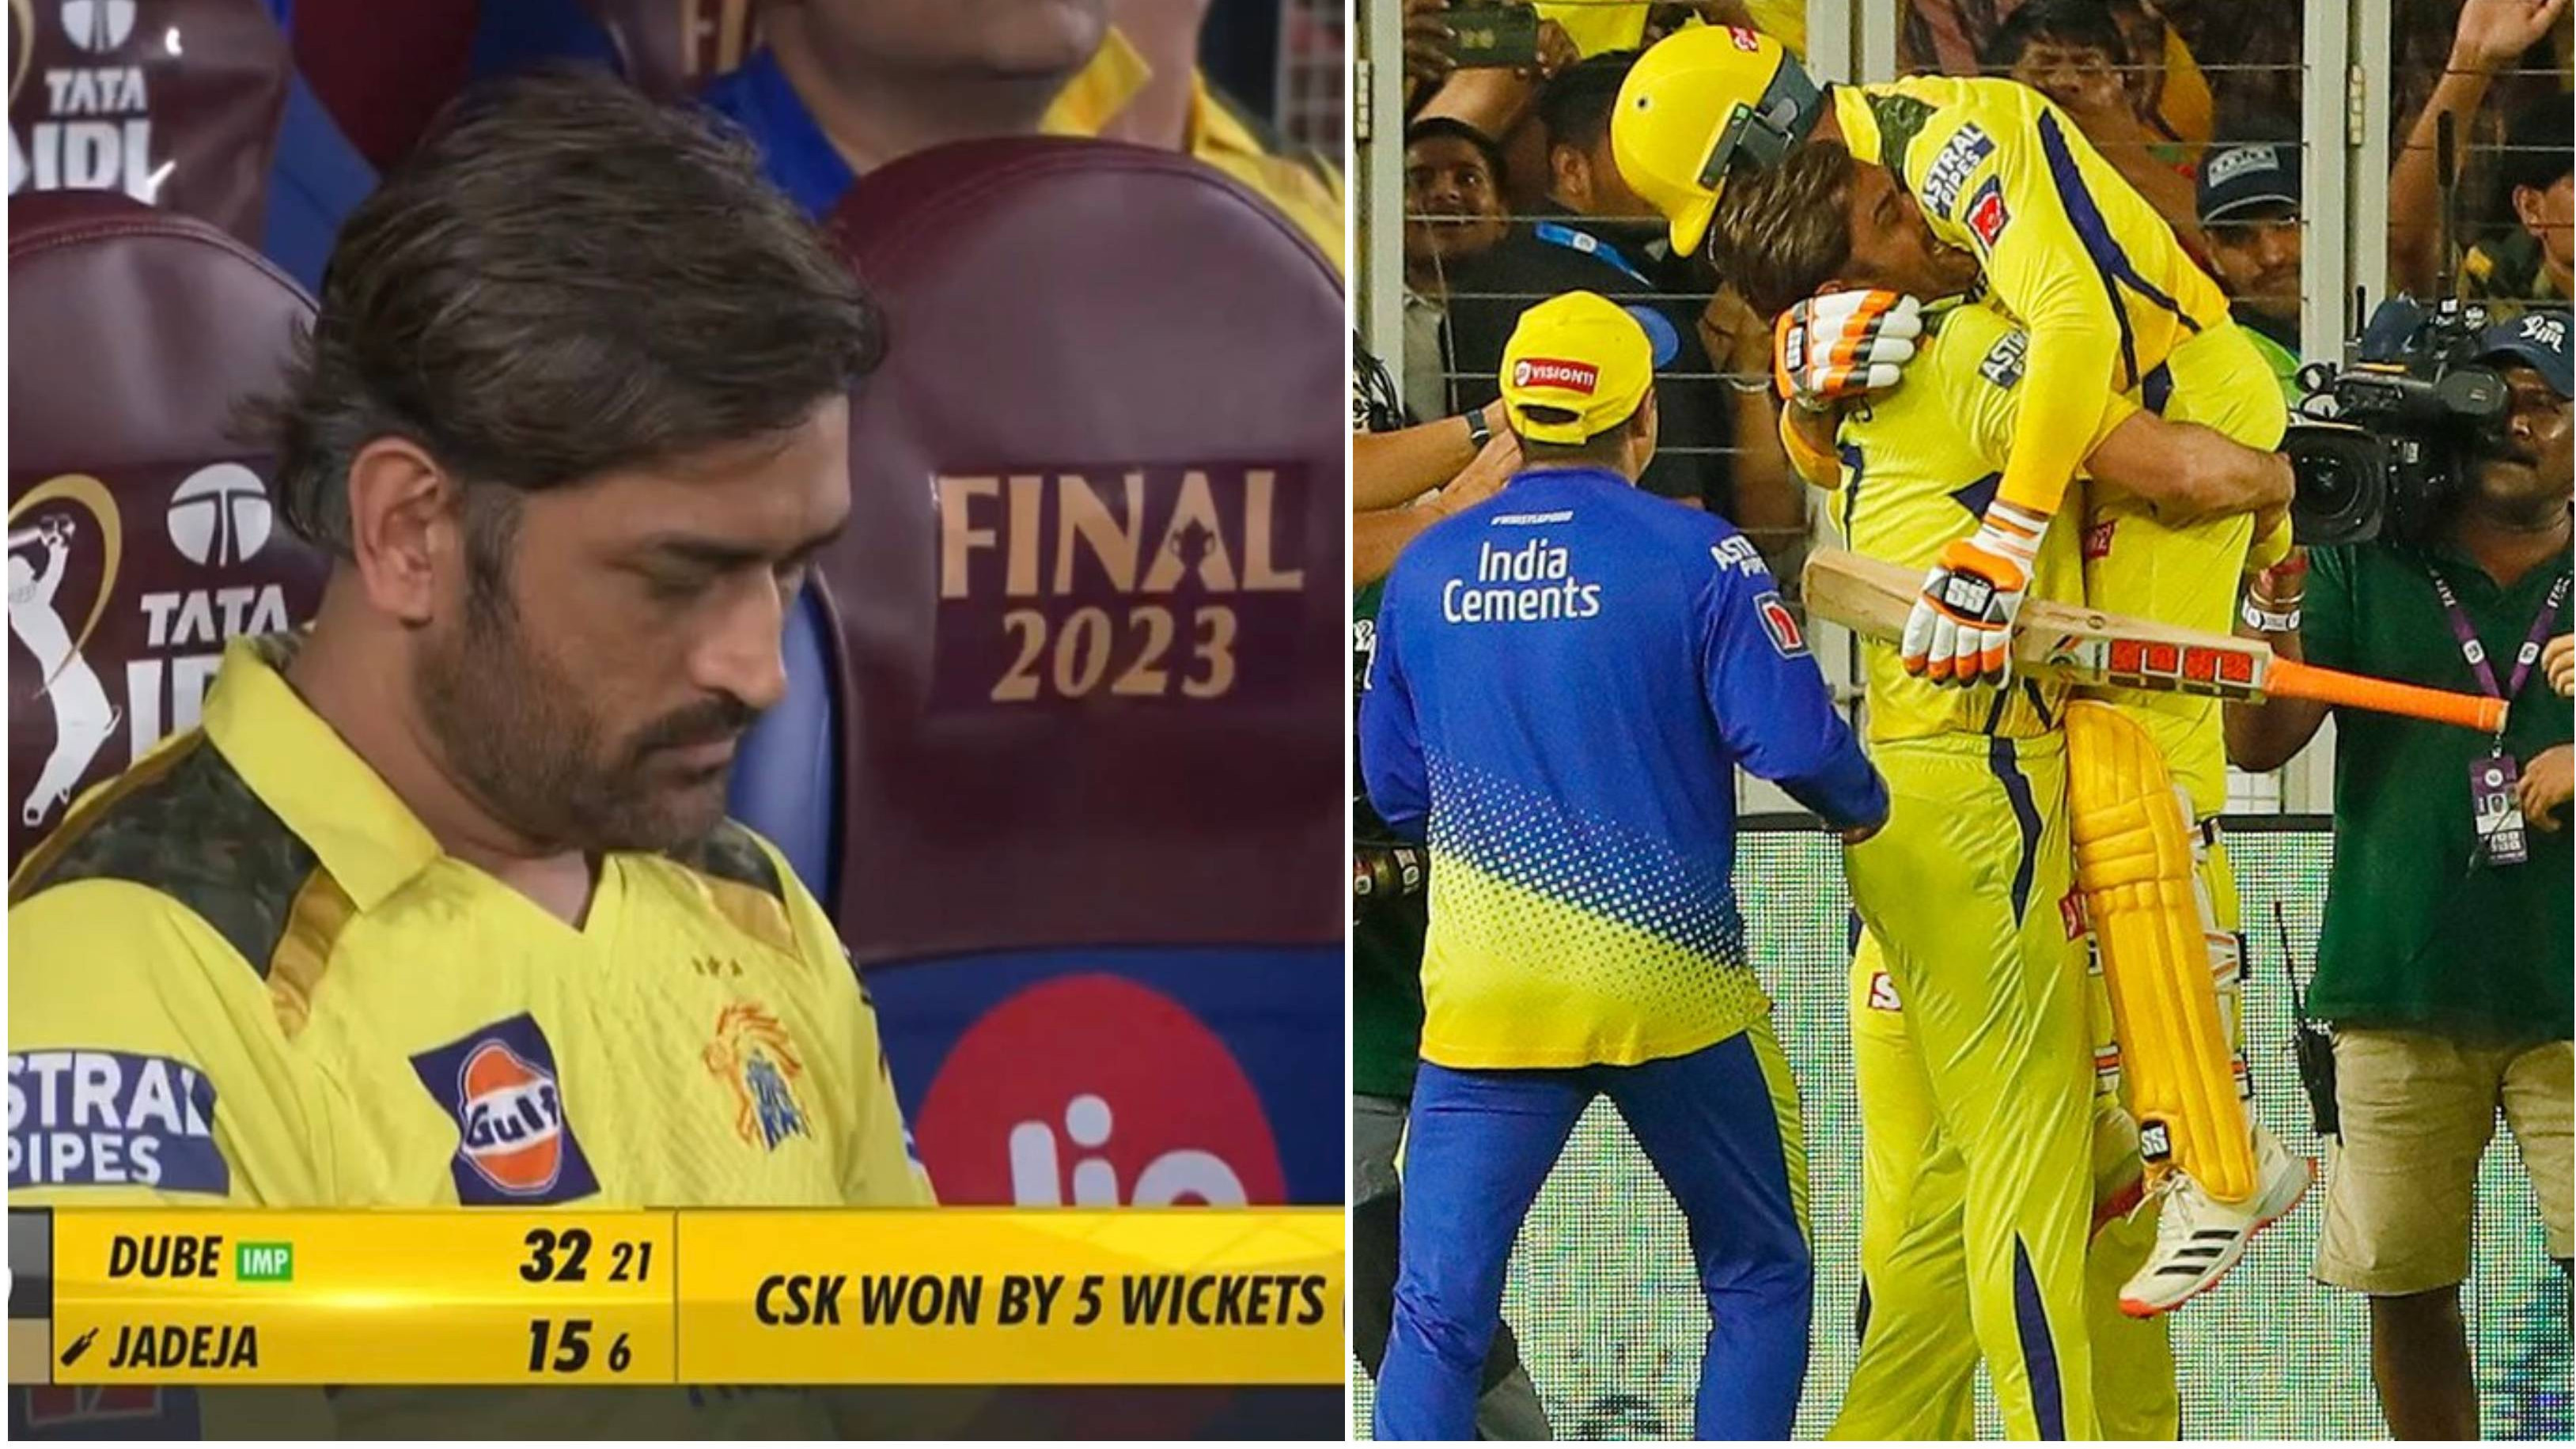 IPL 2023: WATCH – MS Dhoni’s reaction goes viral after CSK win last-ball thriller vs GT to lift IPL title for 5th time